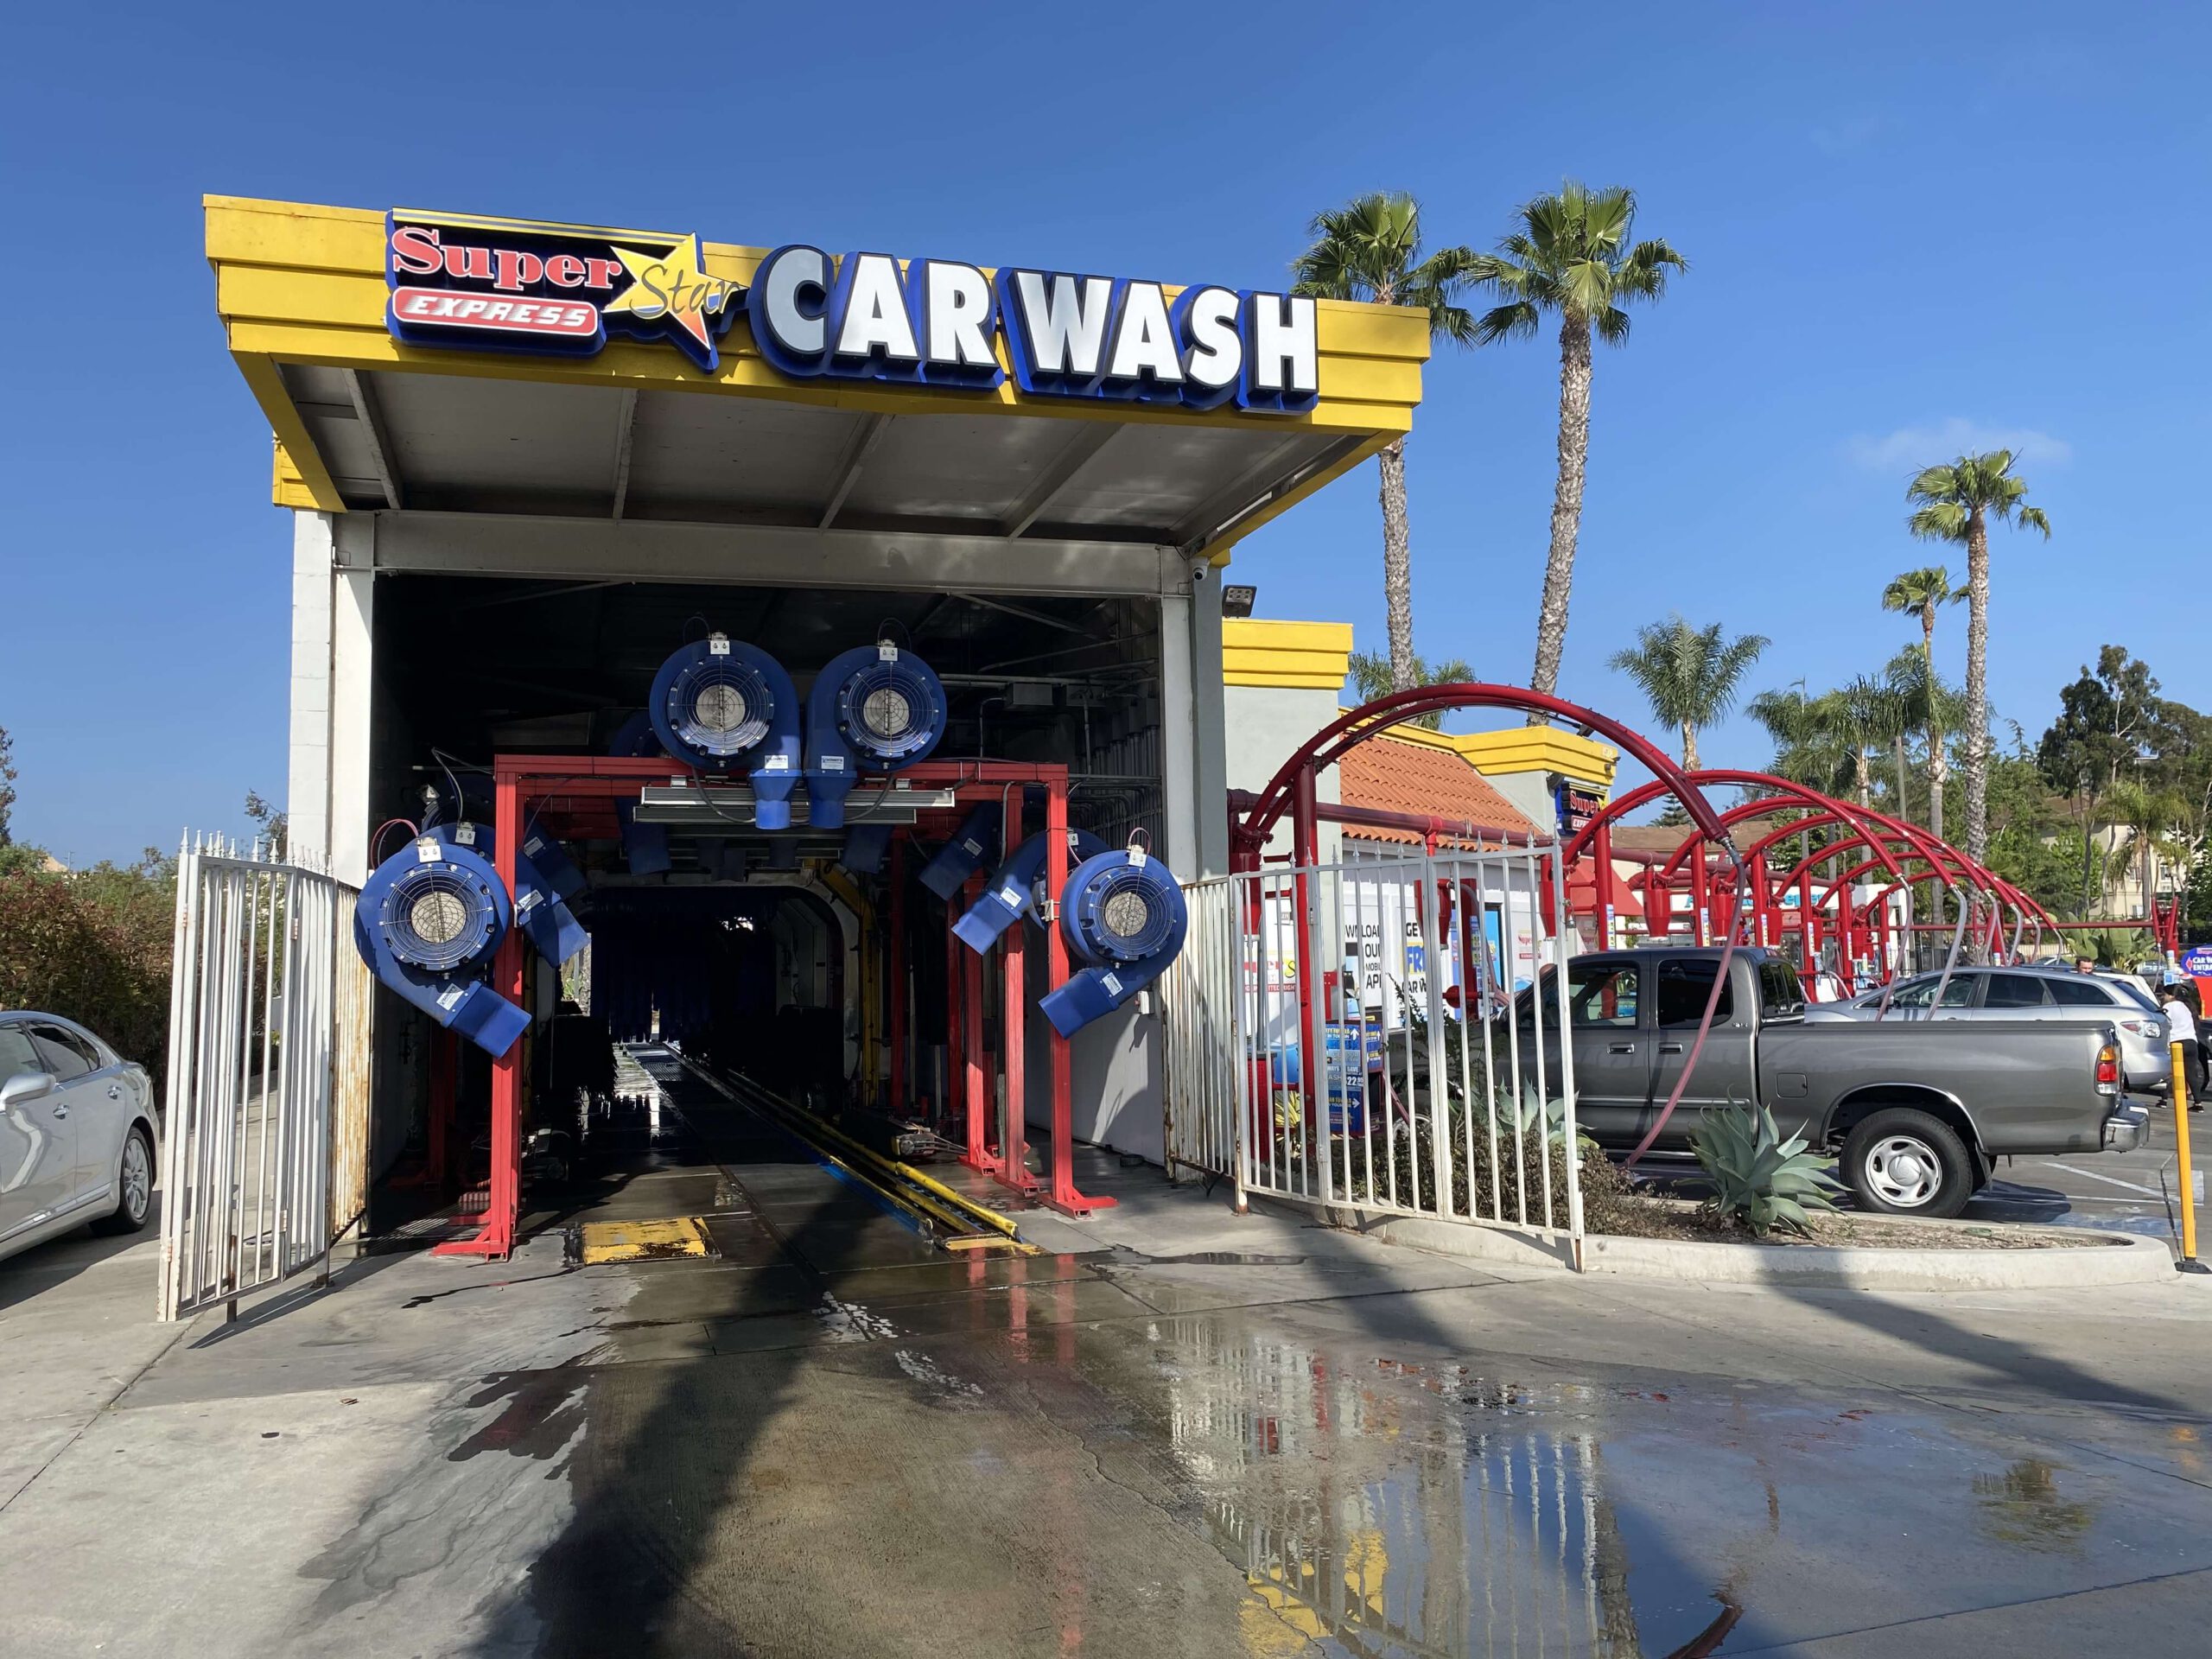 Super Star Car Wash - You know it's important to clean the outside